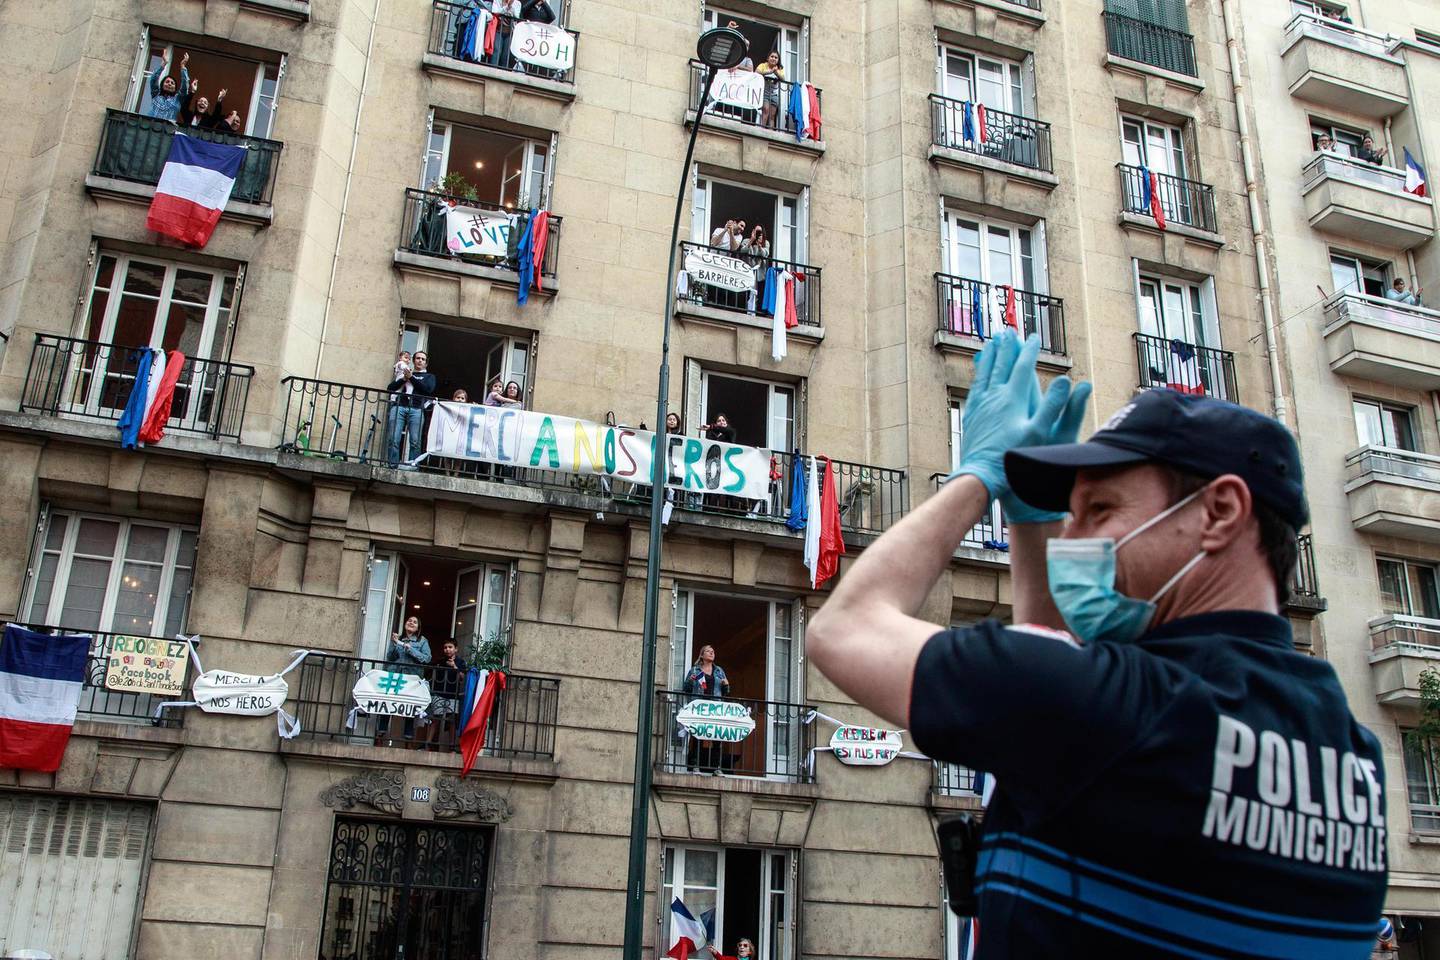 epa08398072 A police officer applauds in front of a building decorated with French flags and support messages for health employees as the neighbors applaud from their windows to support French medical staff amid the ongoing coronavirus COVID-19 pandemic in Saint Mande, near Paris, France, 02 May 2020. During the lockdown, people in many European cities are taking at least a minute each night to applaud in gratitude for health workers and police.  EPA/CHRISTOPHE PETIT TESSON